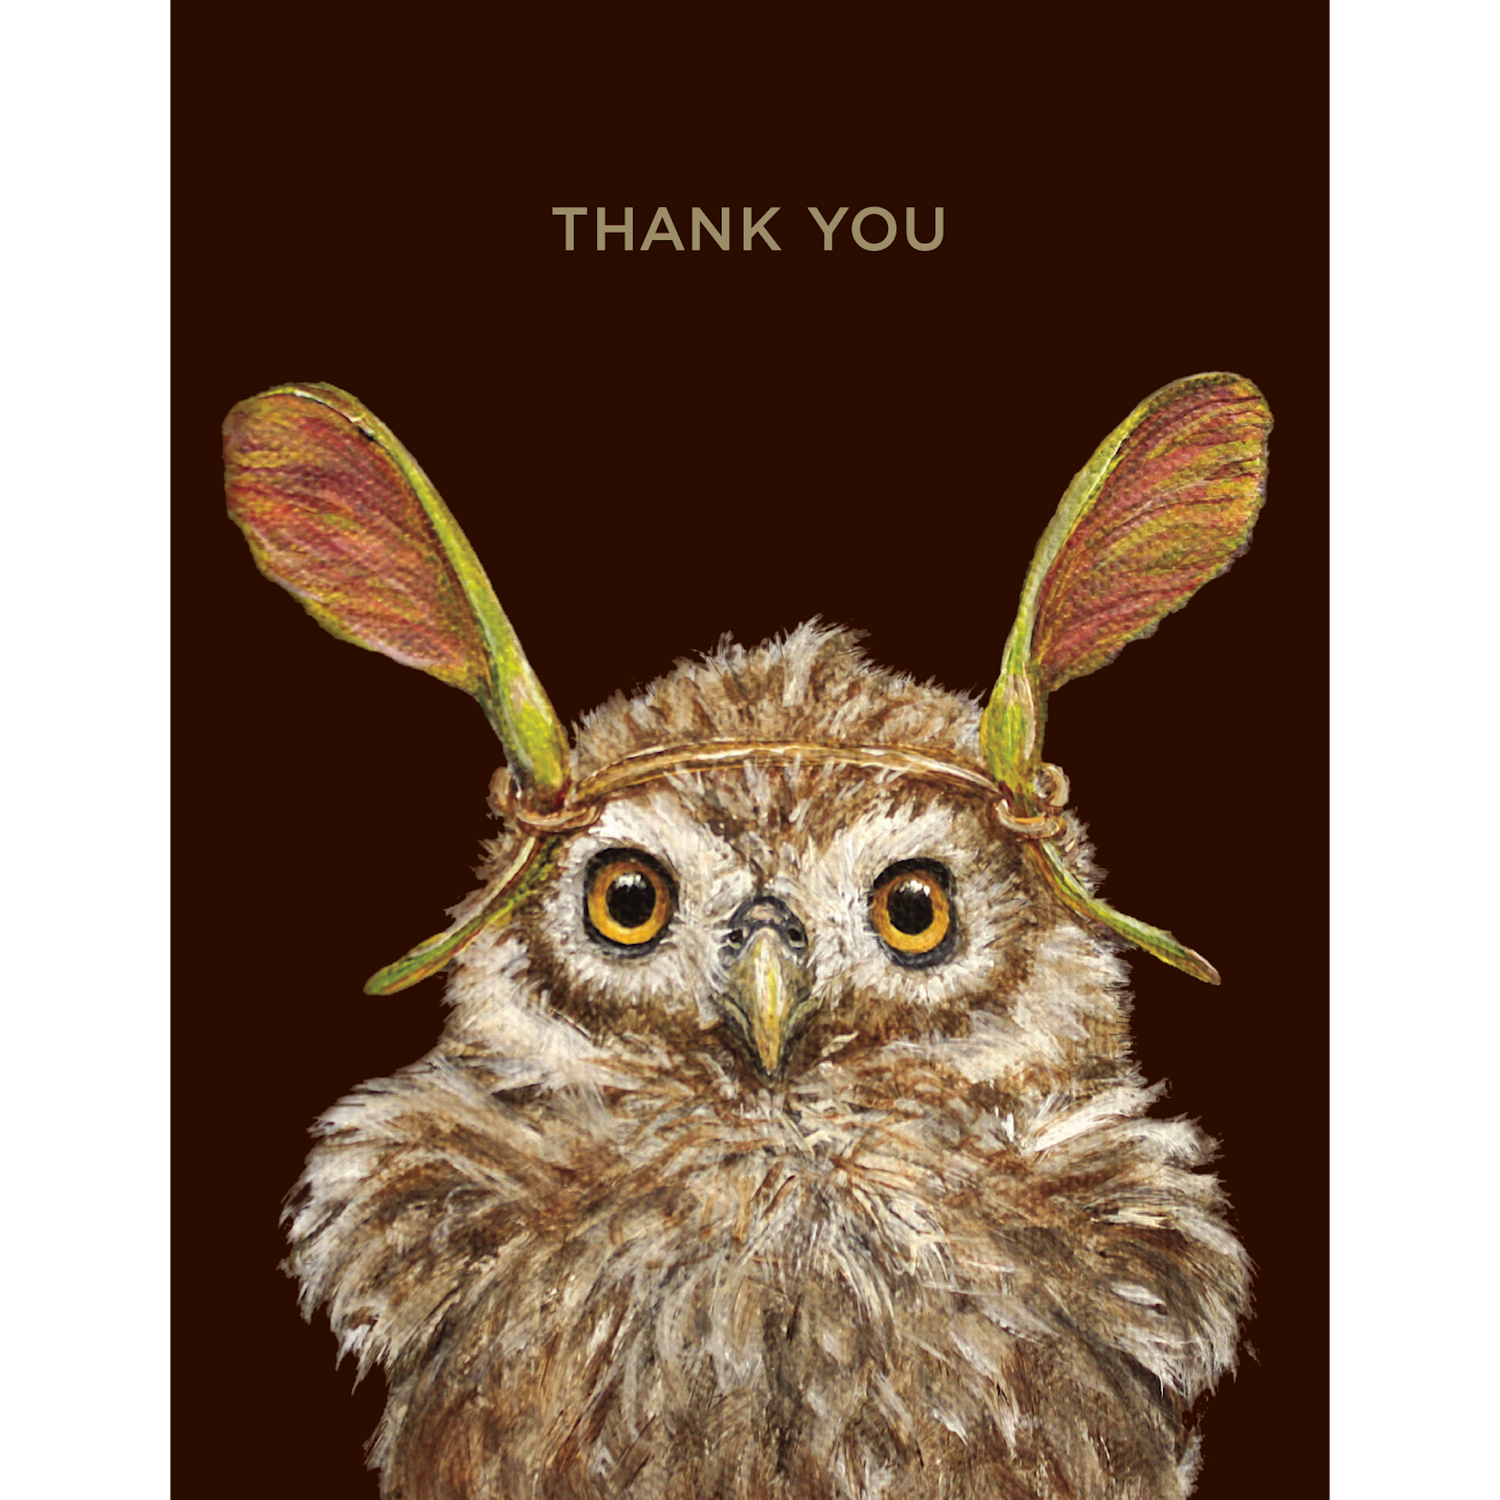 A Hester &amp; Cook Thank You Owl Card featuring an owl wearing horns.